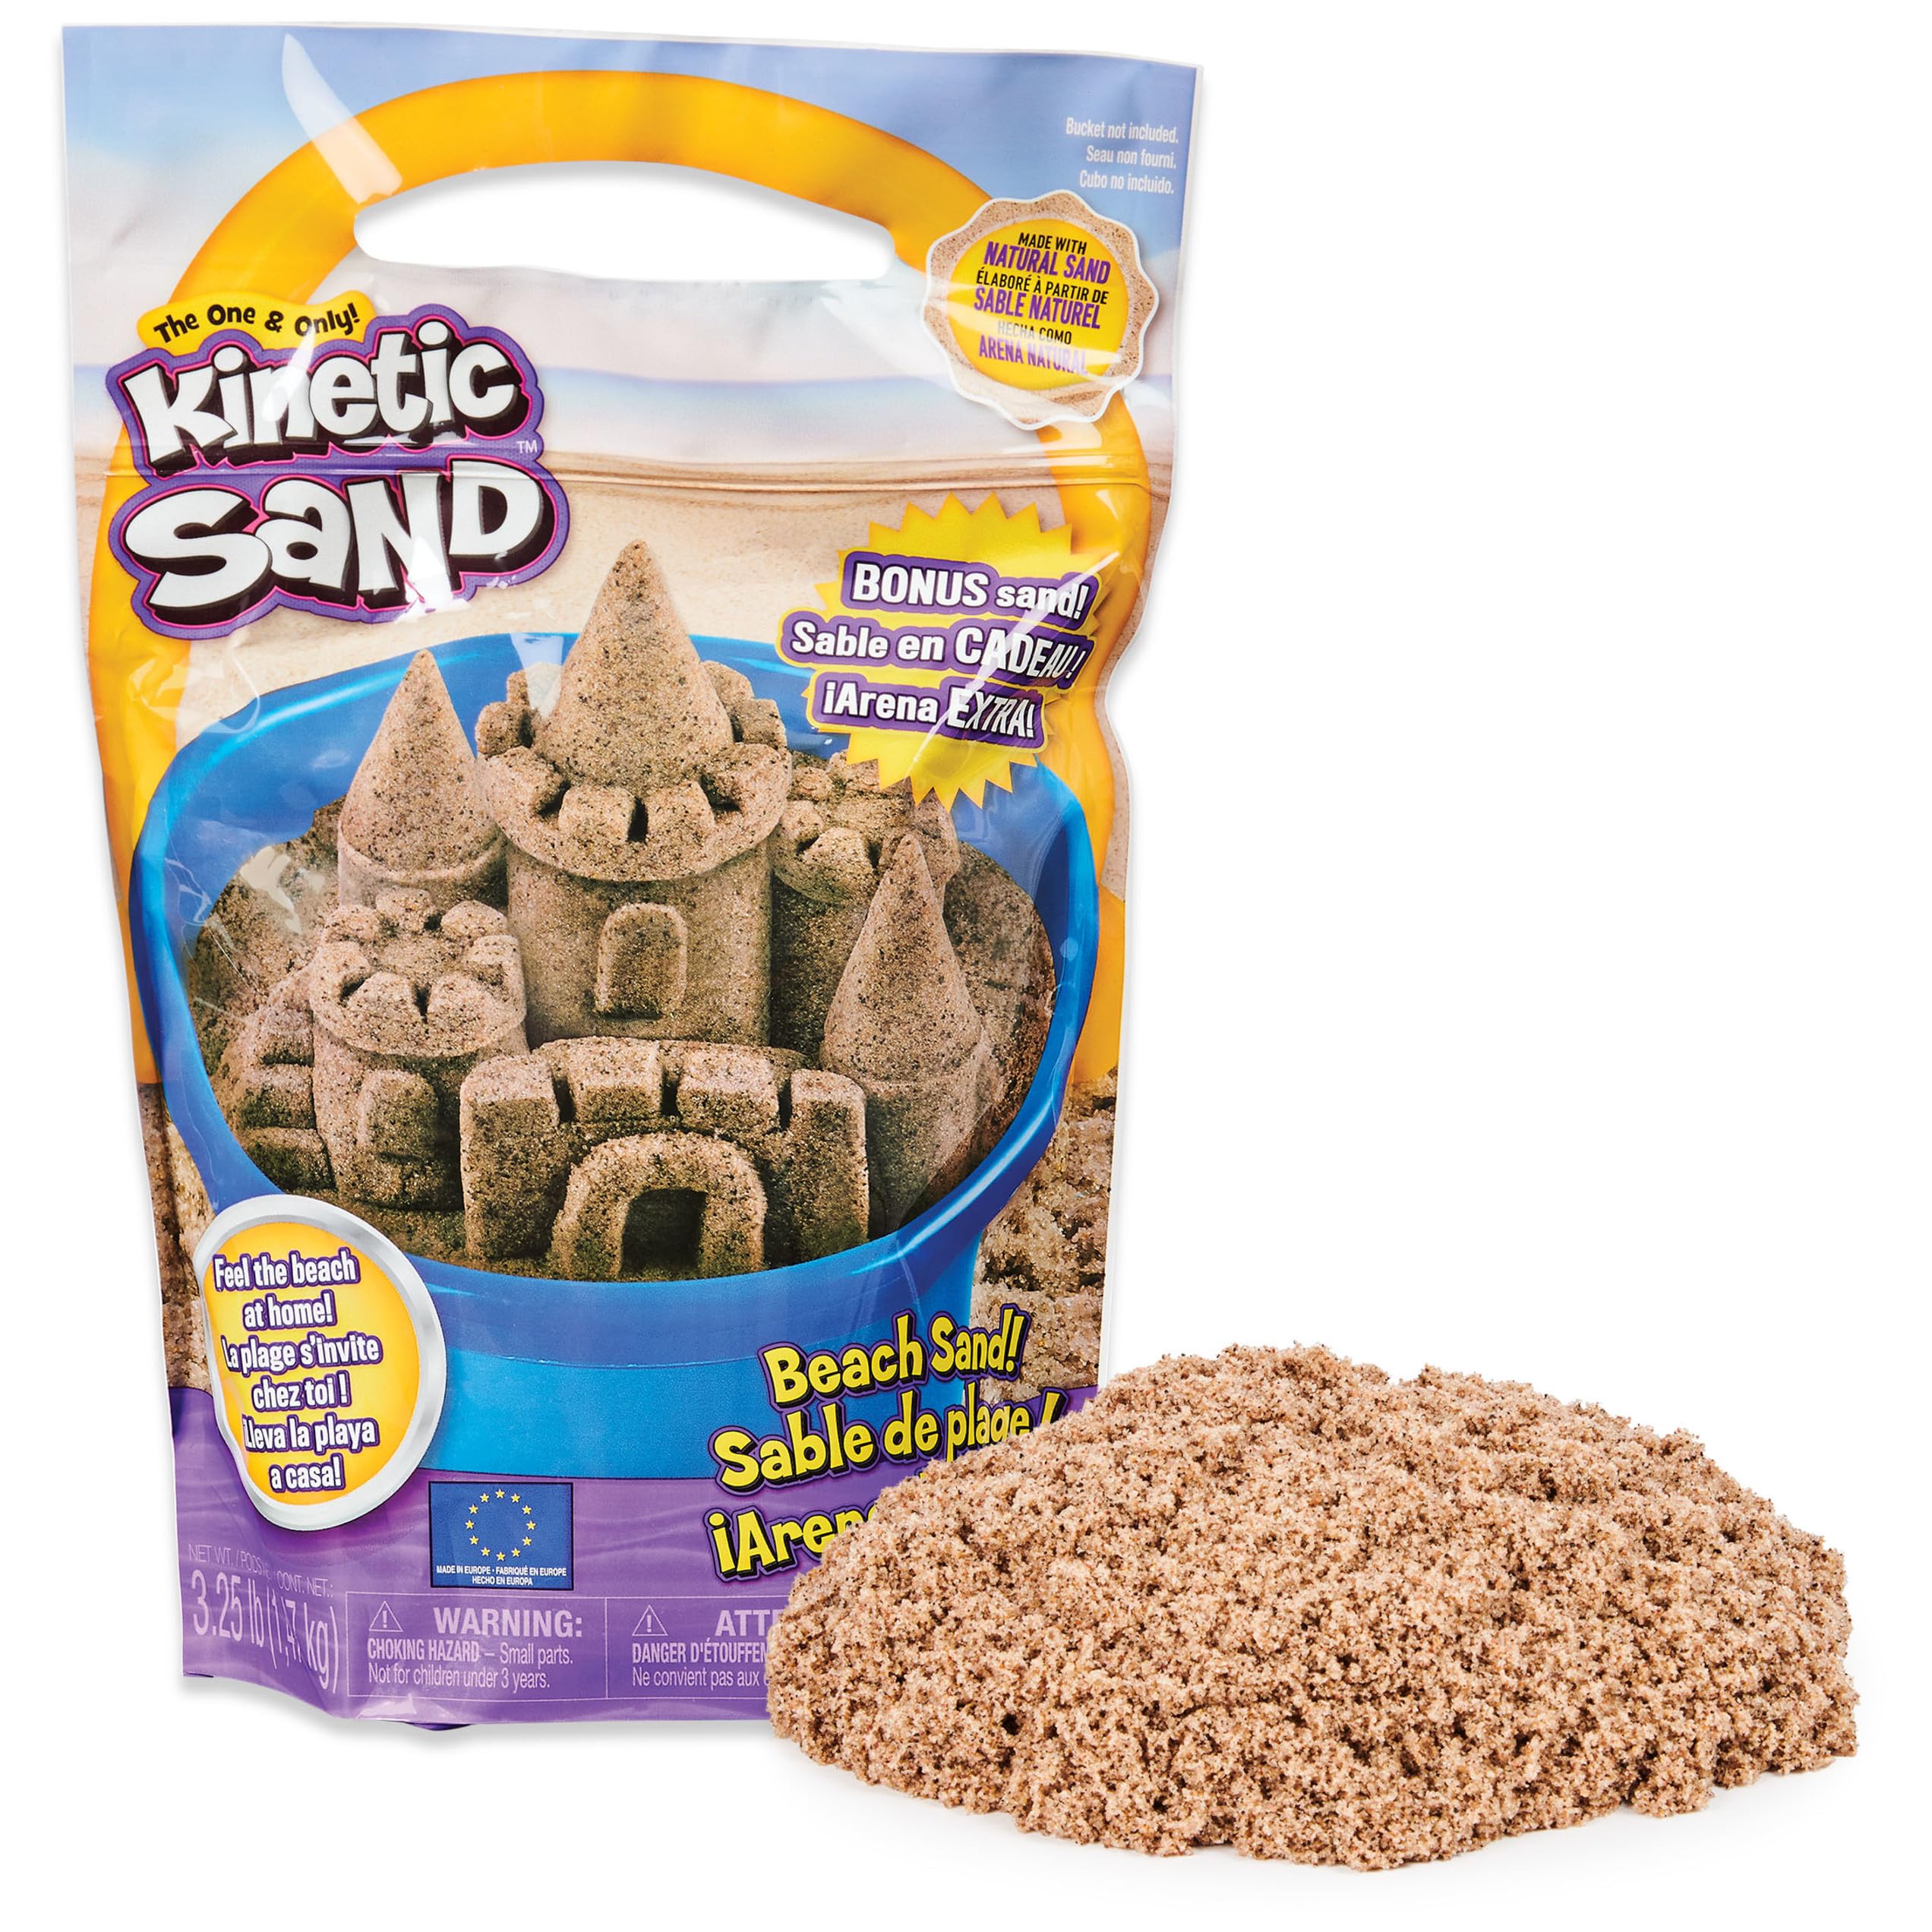 Kinetic Sand, The Original Moldable Play Sand, 3.25lbs Beach Sand, Sensory Toys, Holiday & Christmas Gifts for Kids Ages 3+ (Amazon Exclusive)